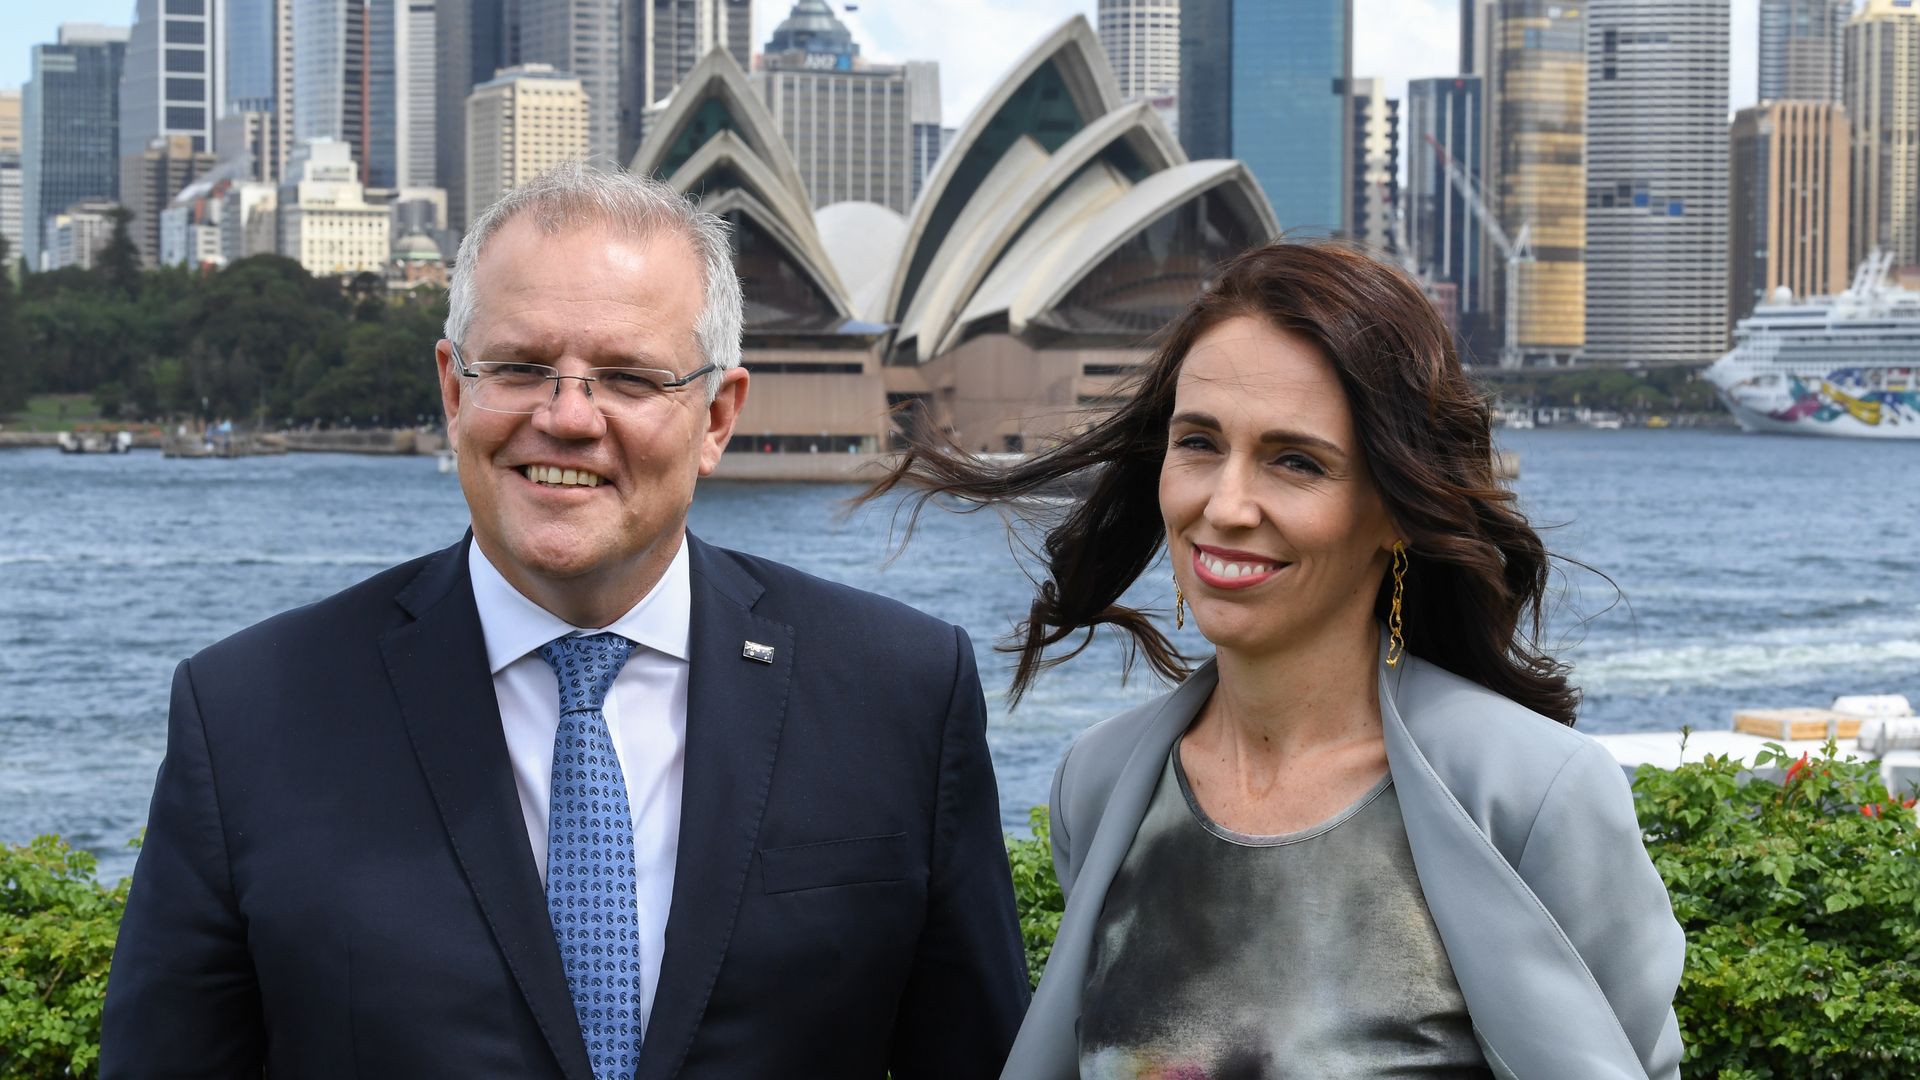 New Zealand Prime Minister, Jacinda Ardern and Australian Prime Minster, Scott Morrison pose for a photo before a press conference held at Admiralty House on February 28, 2020 in Sydney, Australia. 